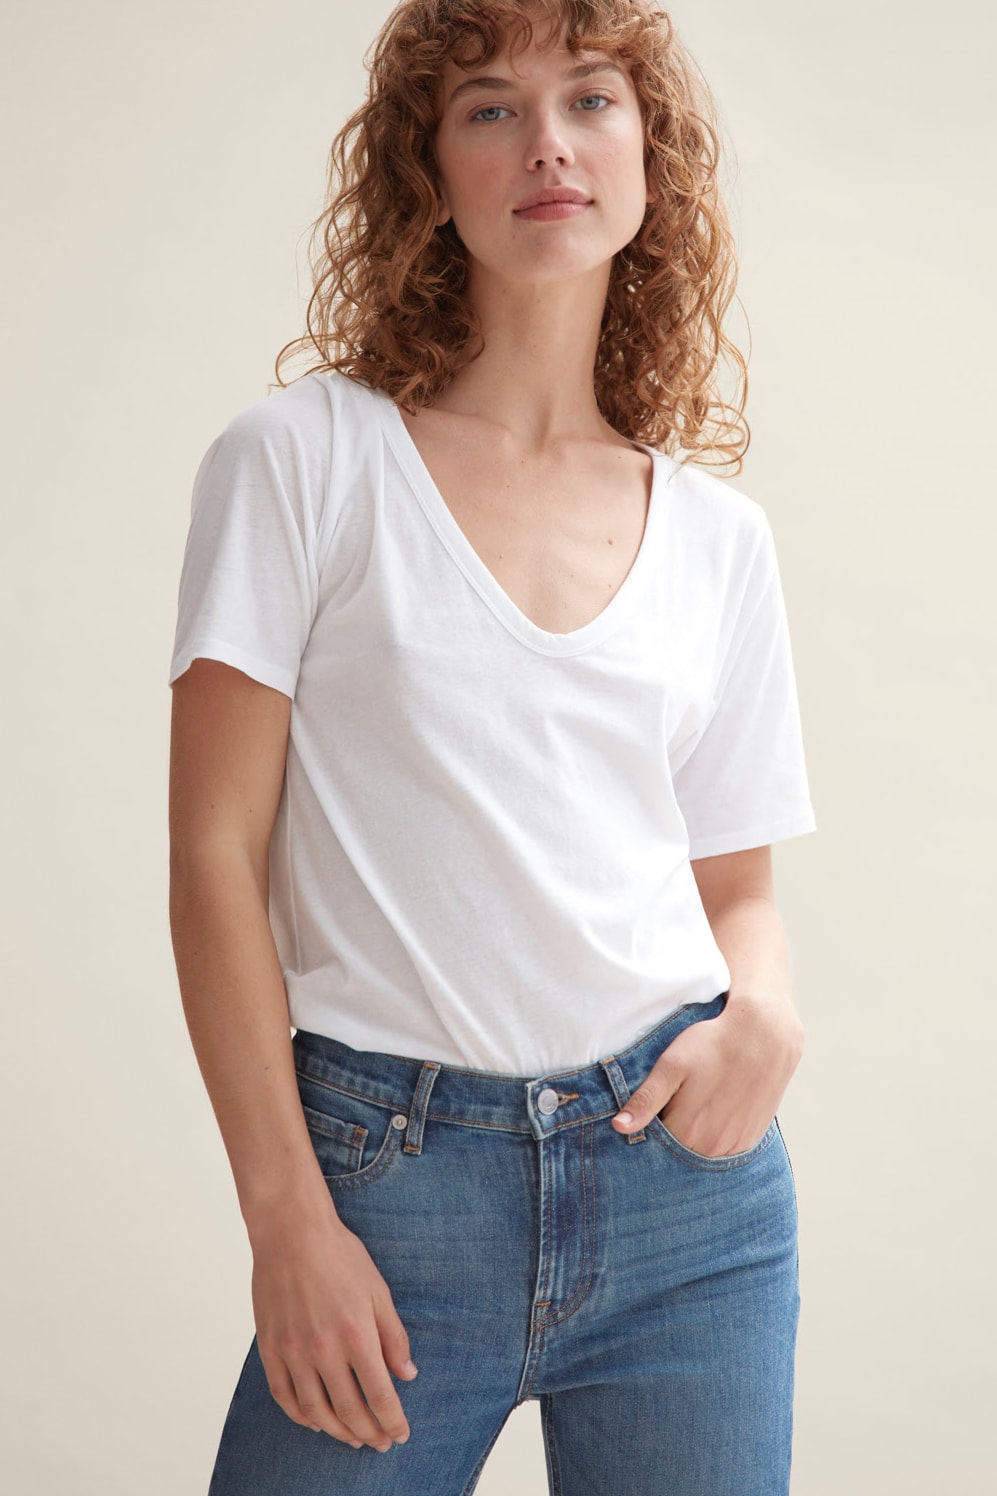 Everlane Breathable Air T-shirt Cami White Pink Navy Light Brown